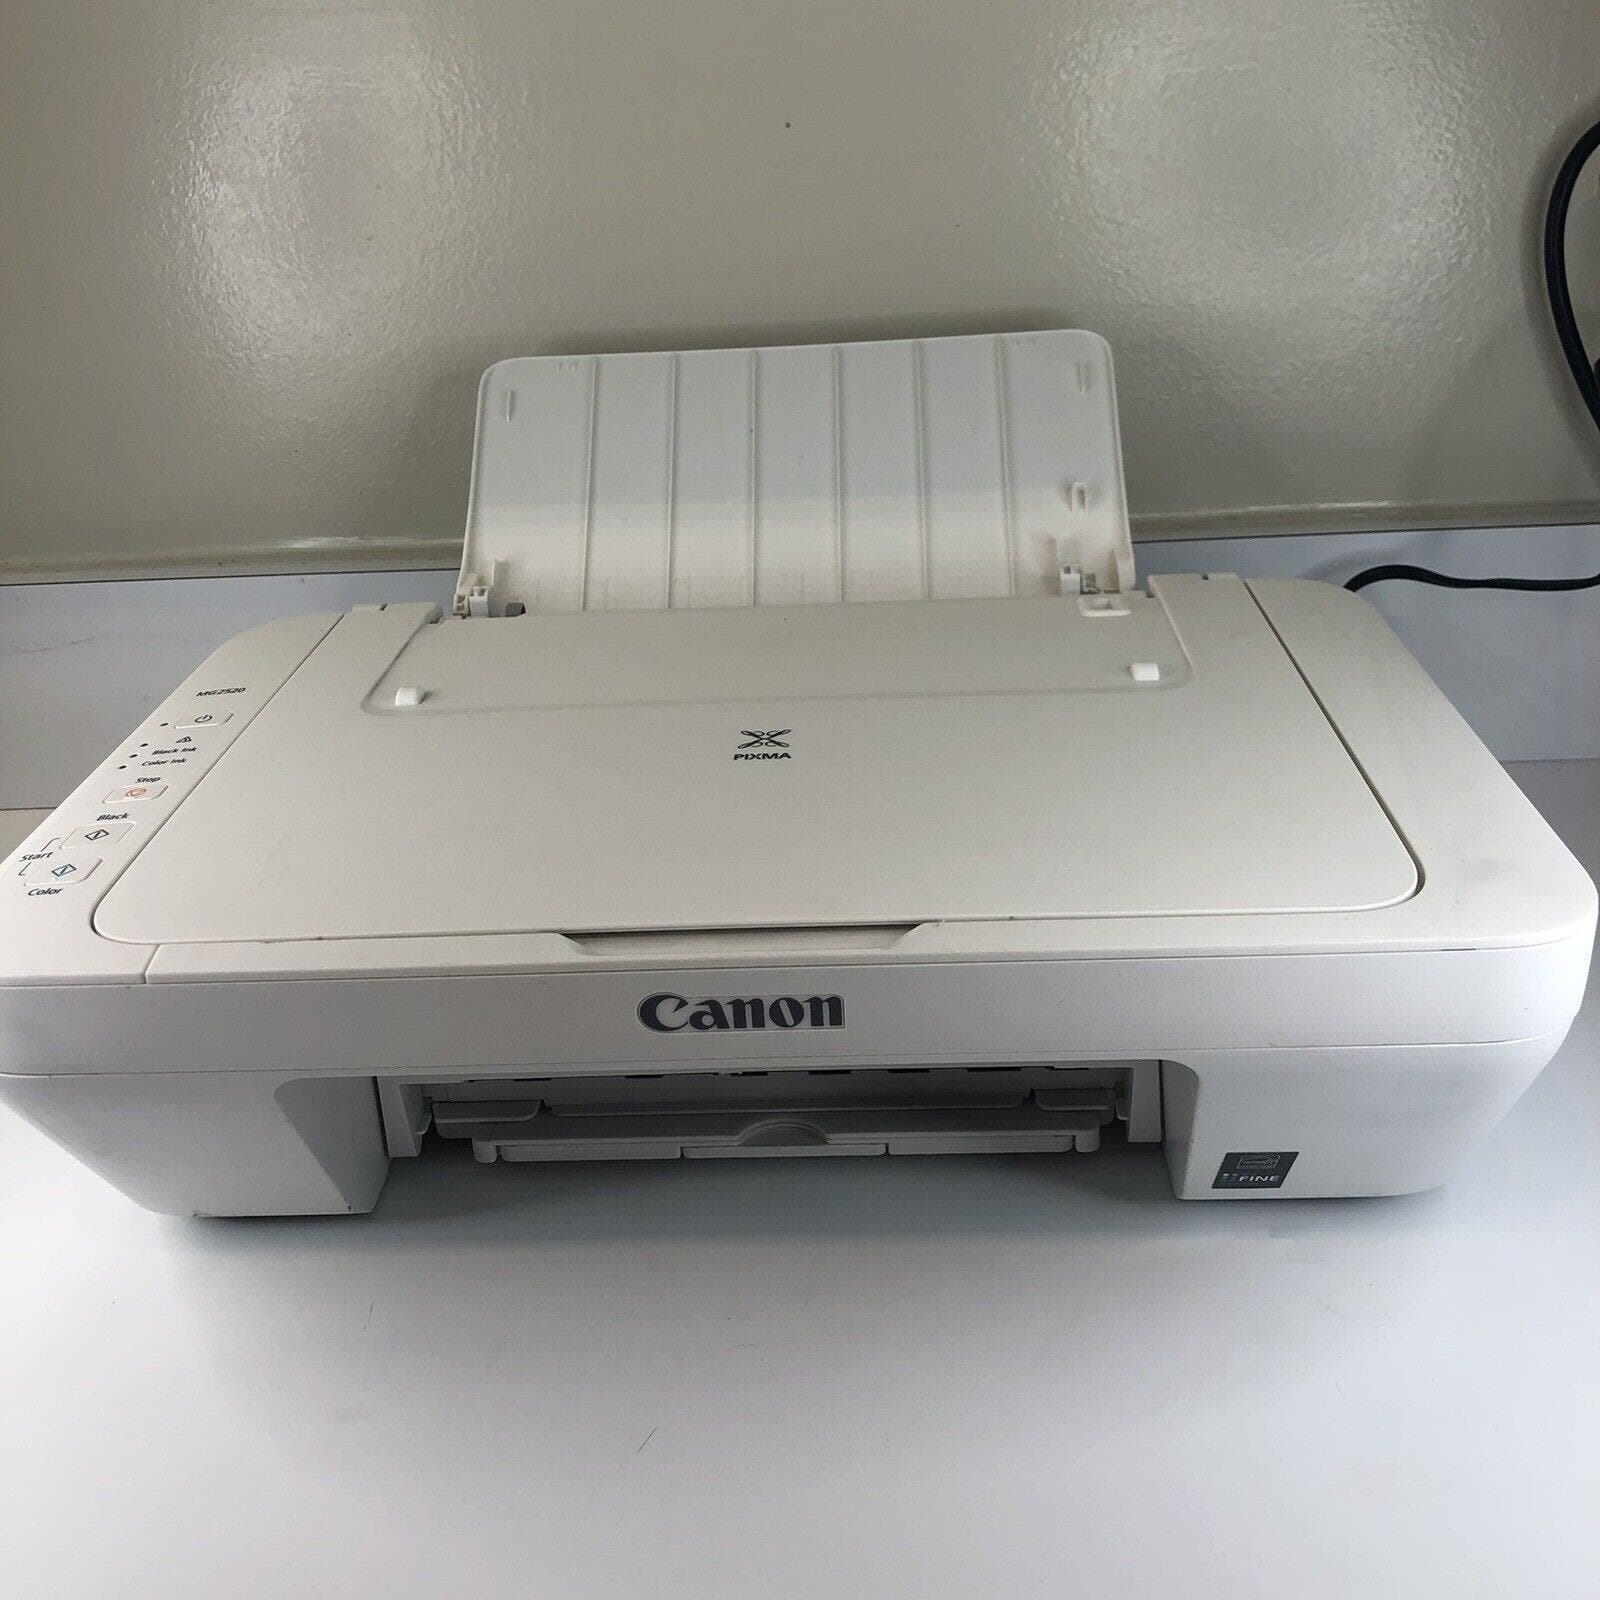 Canon PIXMA MG2520/2522 All-In-One Inkjet Printer Scanner Copier No Ink - $28.05